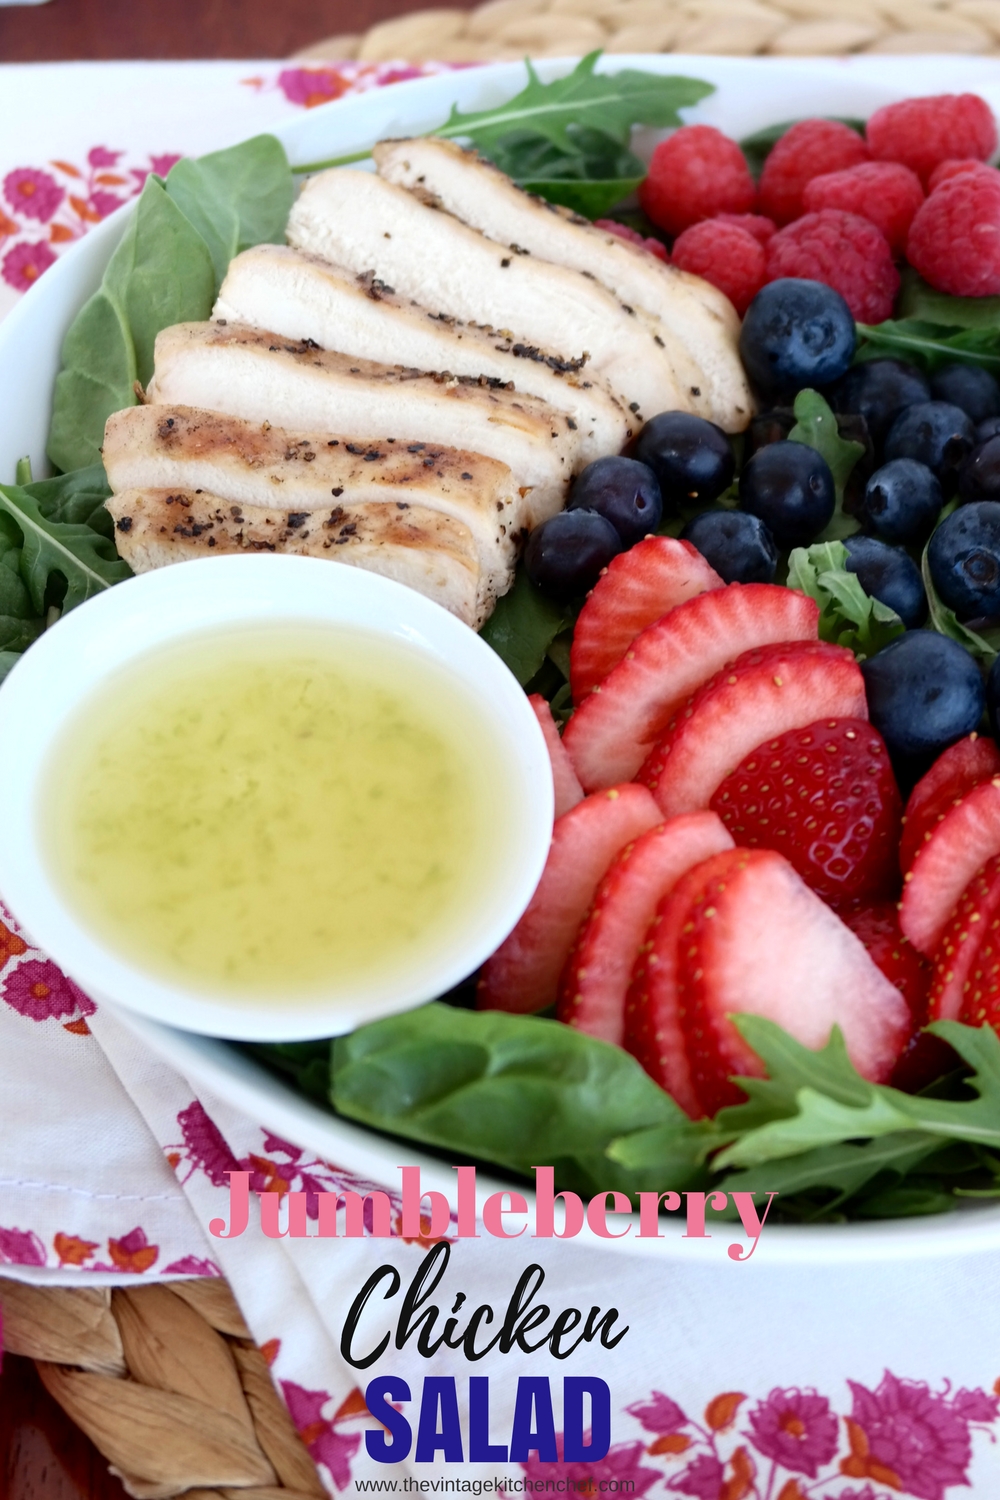 Jumbleberry Chicken Salad with Citrus Vinaigrette delights the taste buds with a mix of tangy and sweet flavors. What a fun way to enjoy a healthy meal!